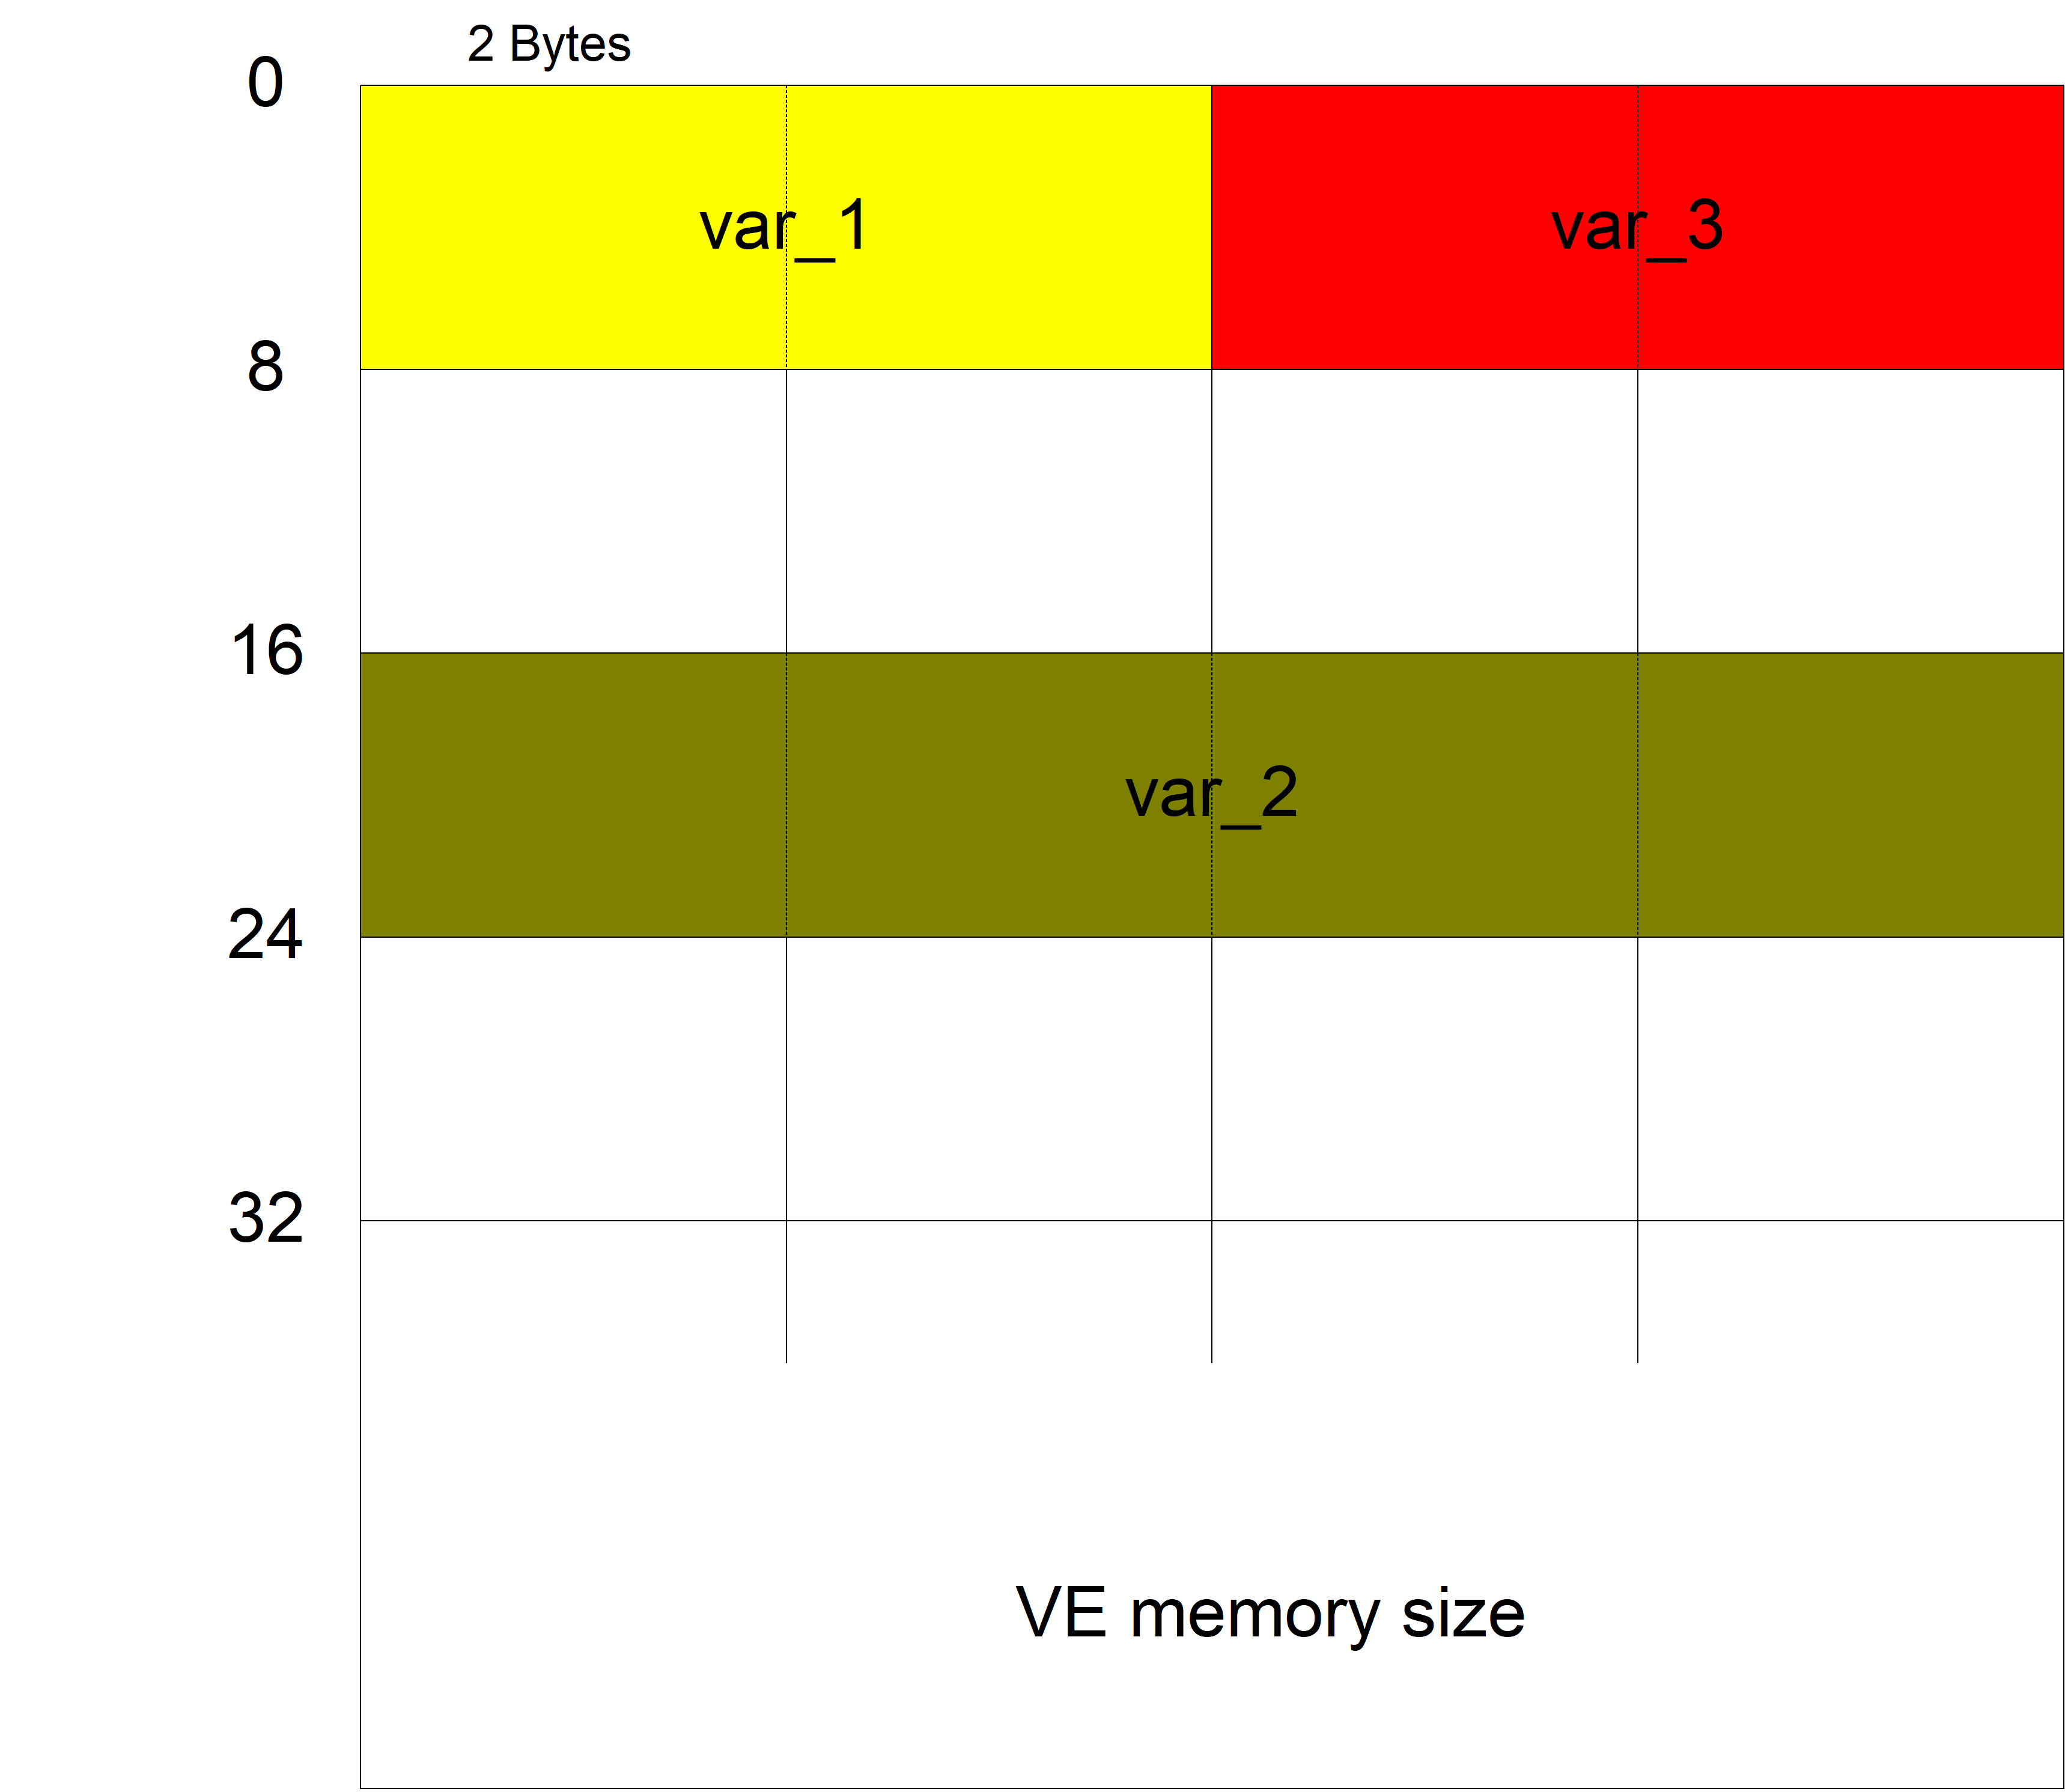 Resulting memory layout: